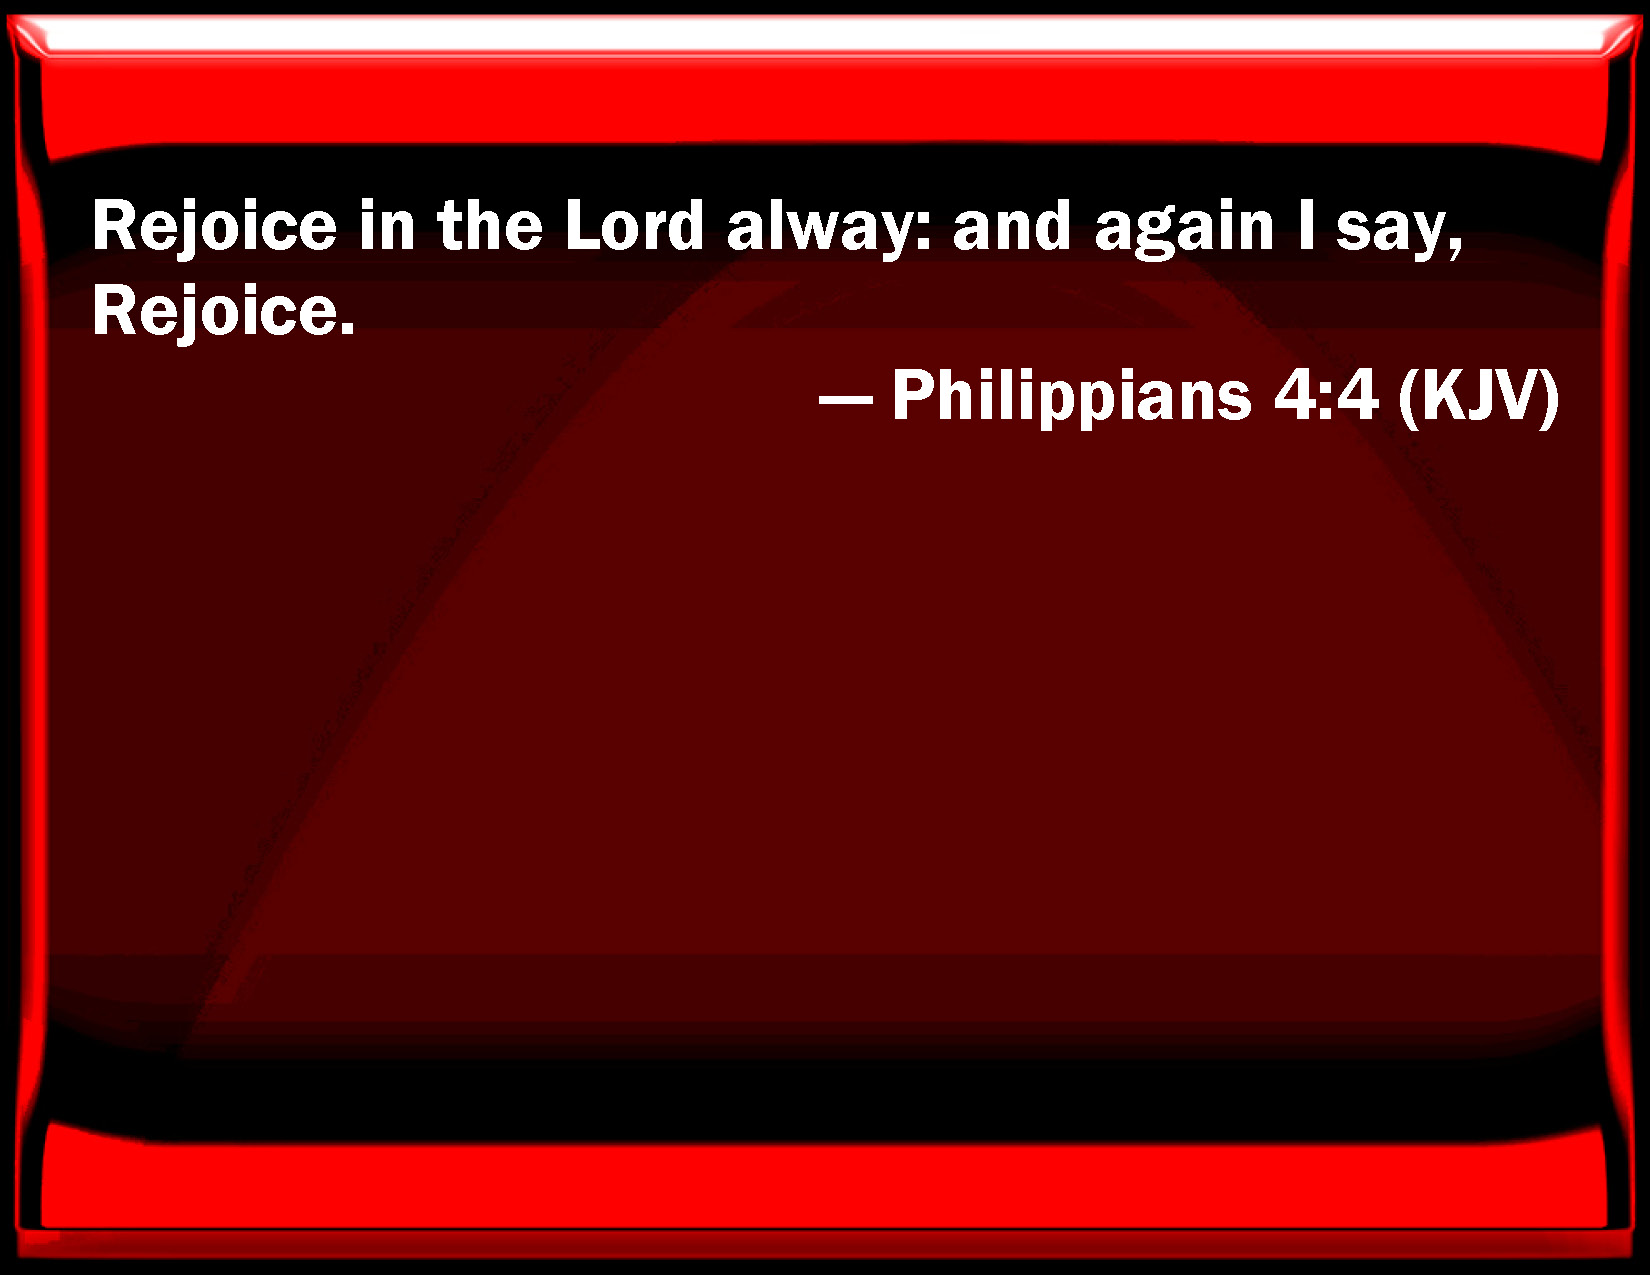 Philippians 4:4 Rejoice in the Lord always: and again I say, Rejoice.